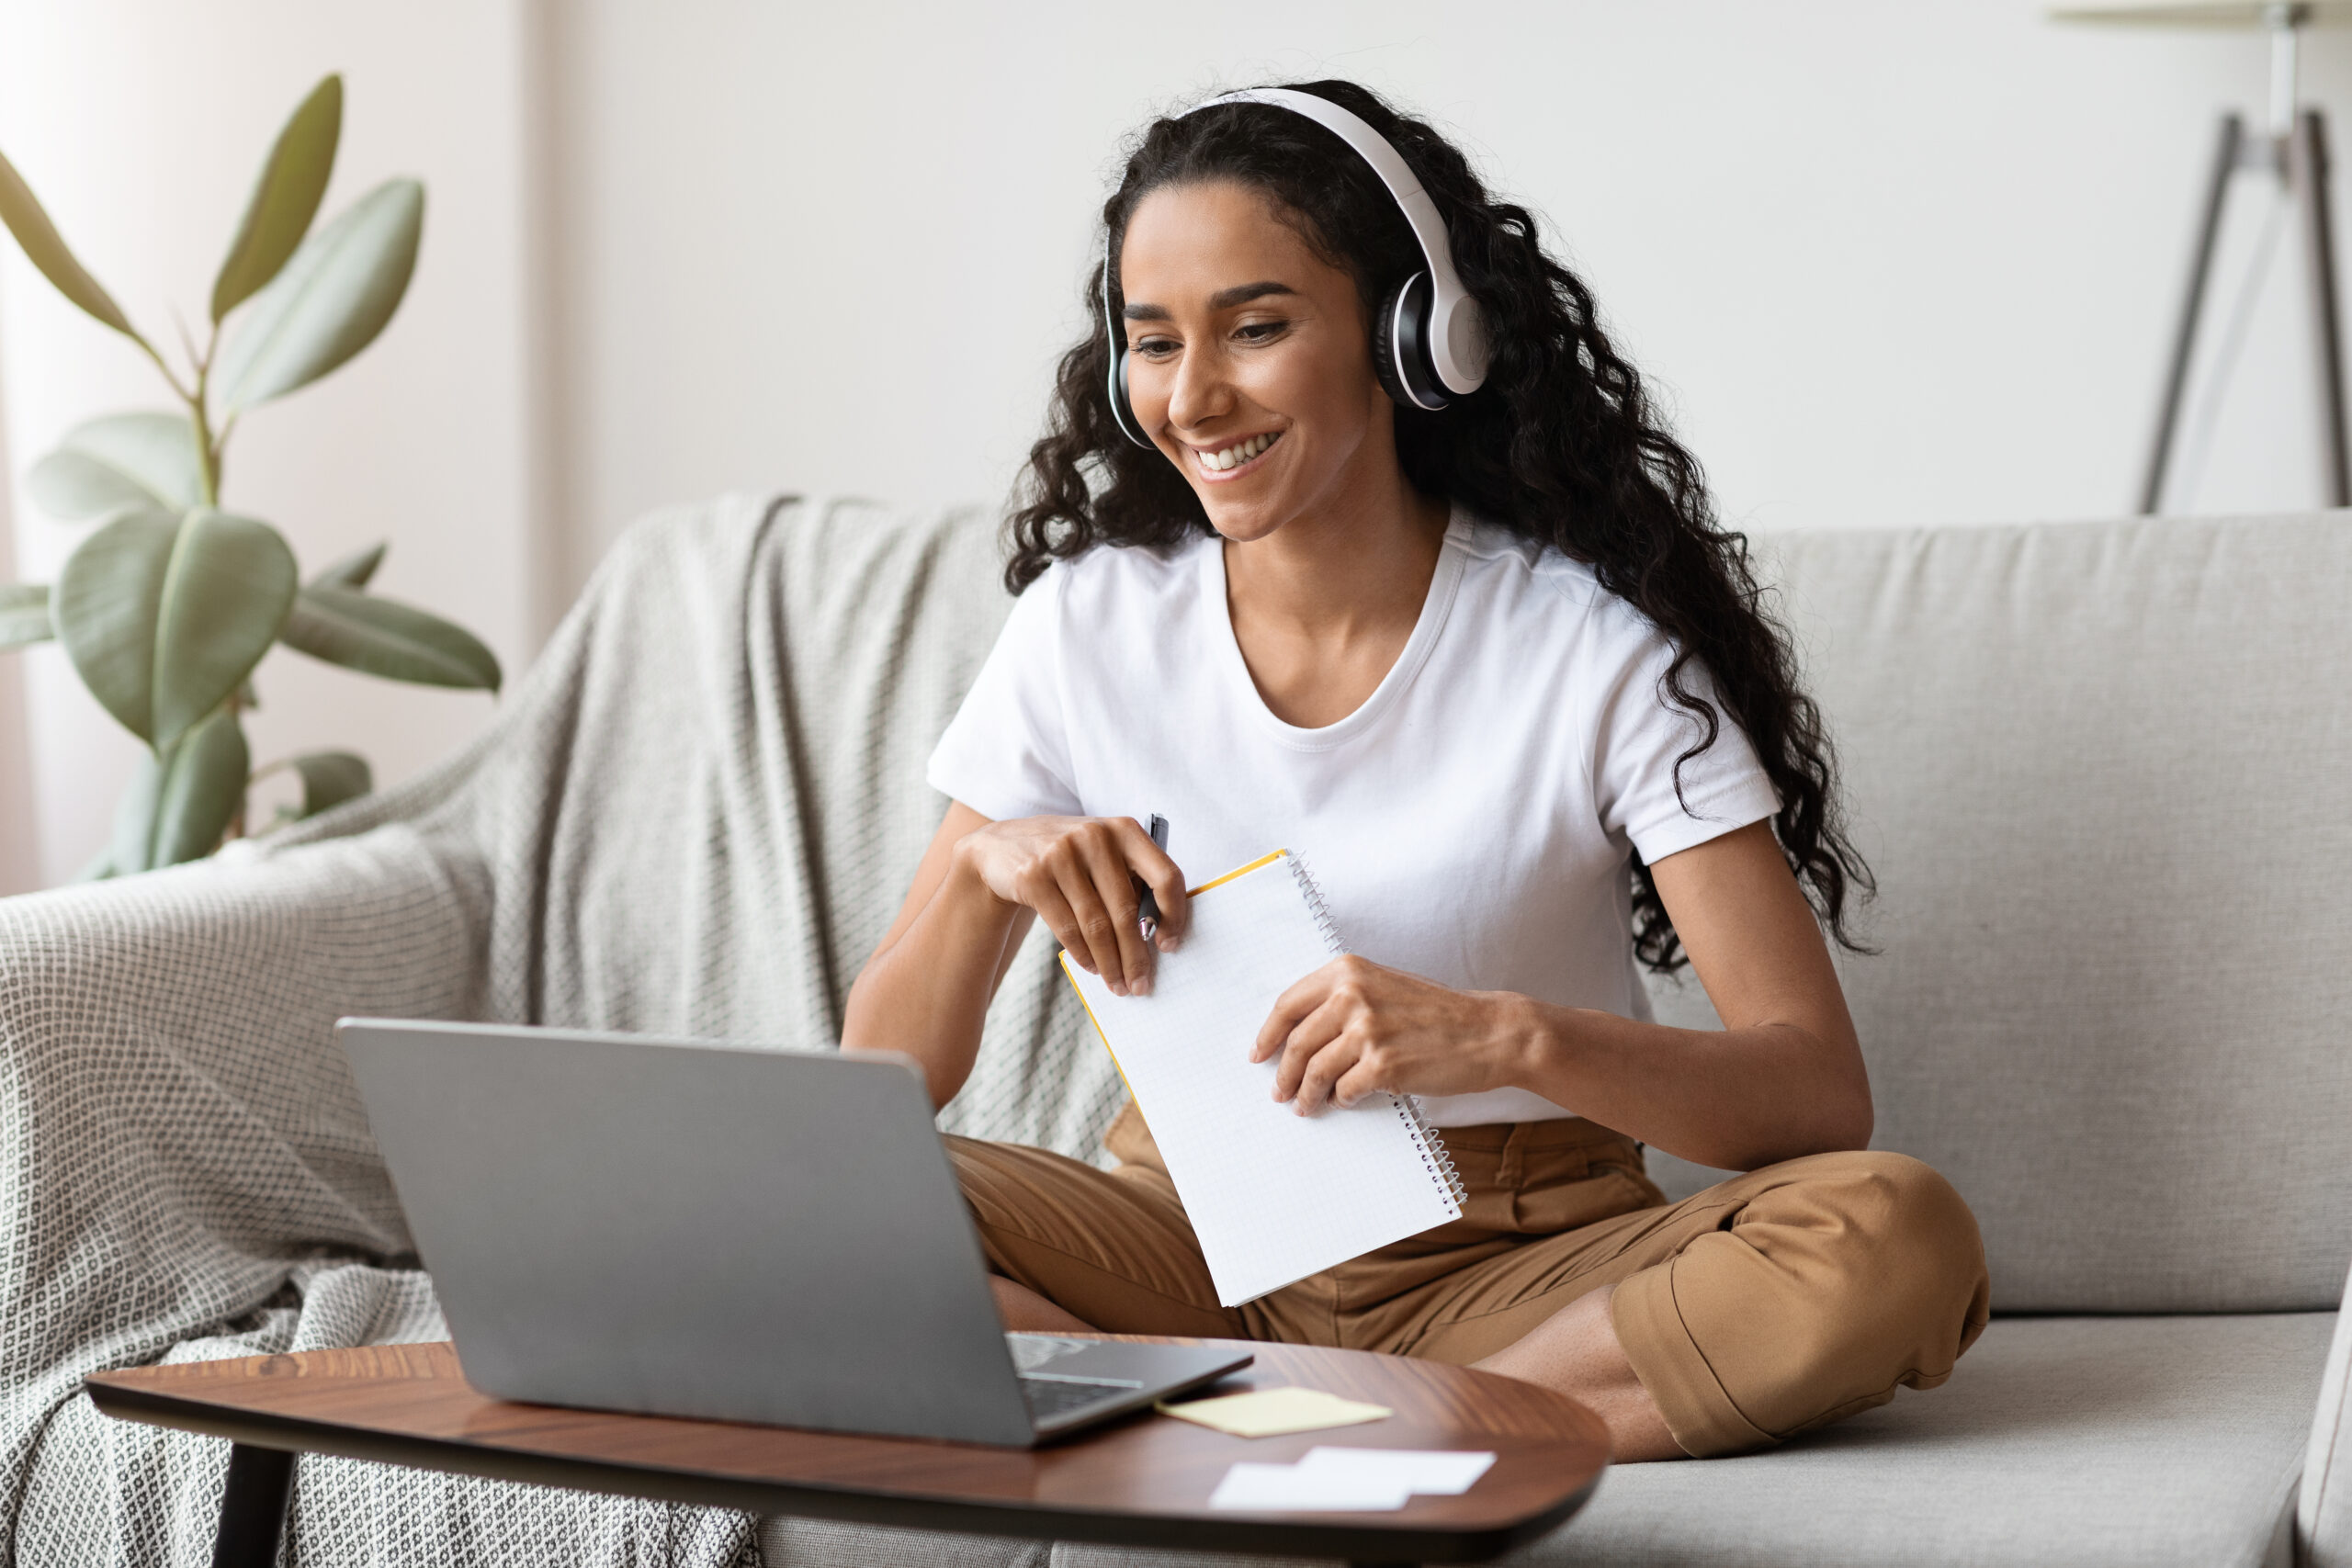 Cheerful pretty brunette lady attending online language course from home, sitting on sofa, using laptop and wireless headset, taking notes and smiling, enjoying online studying, copy space